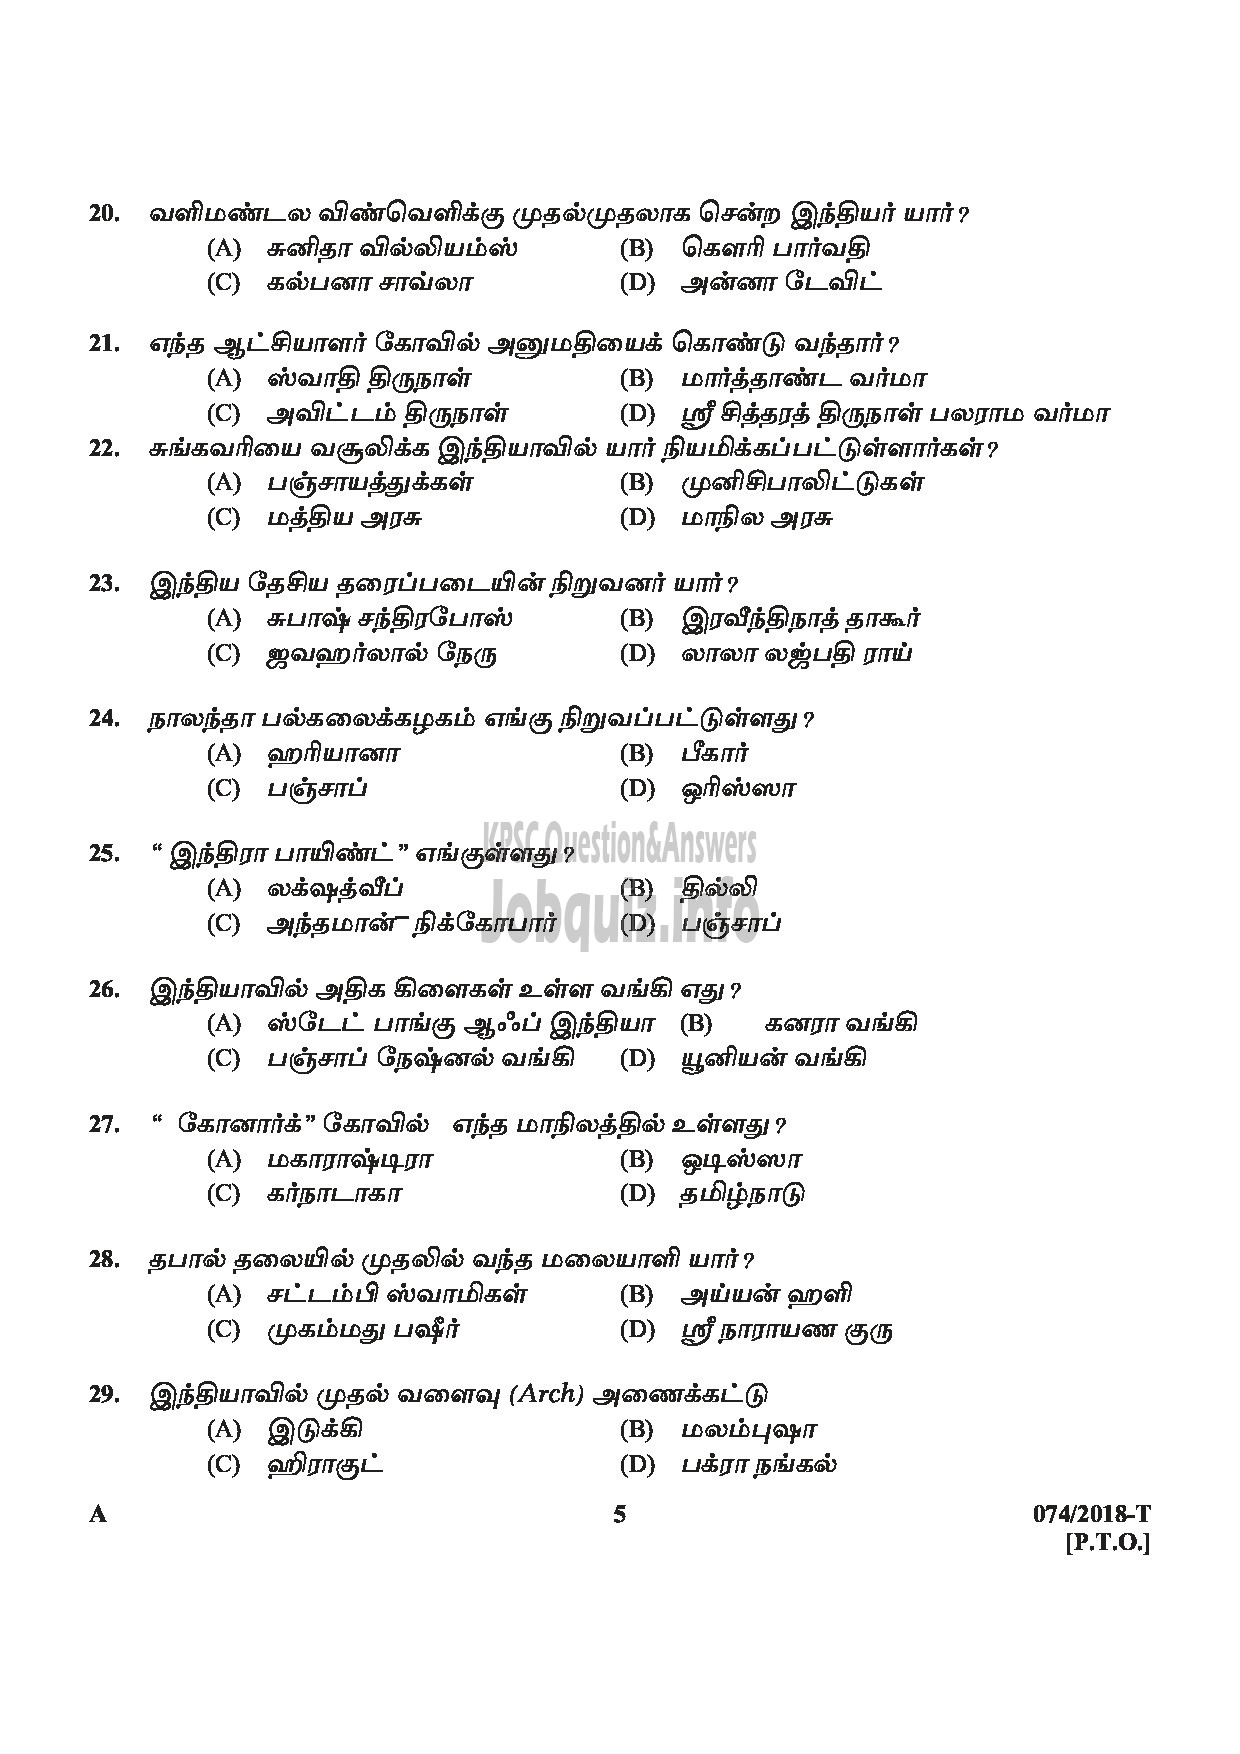 Kerala PSC Question Paper - Police Constable Driver (Armed Police Battalion) Department : Police Medium of Question : Tamil-5